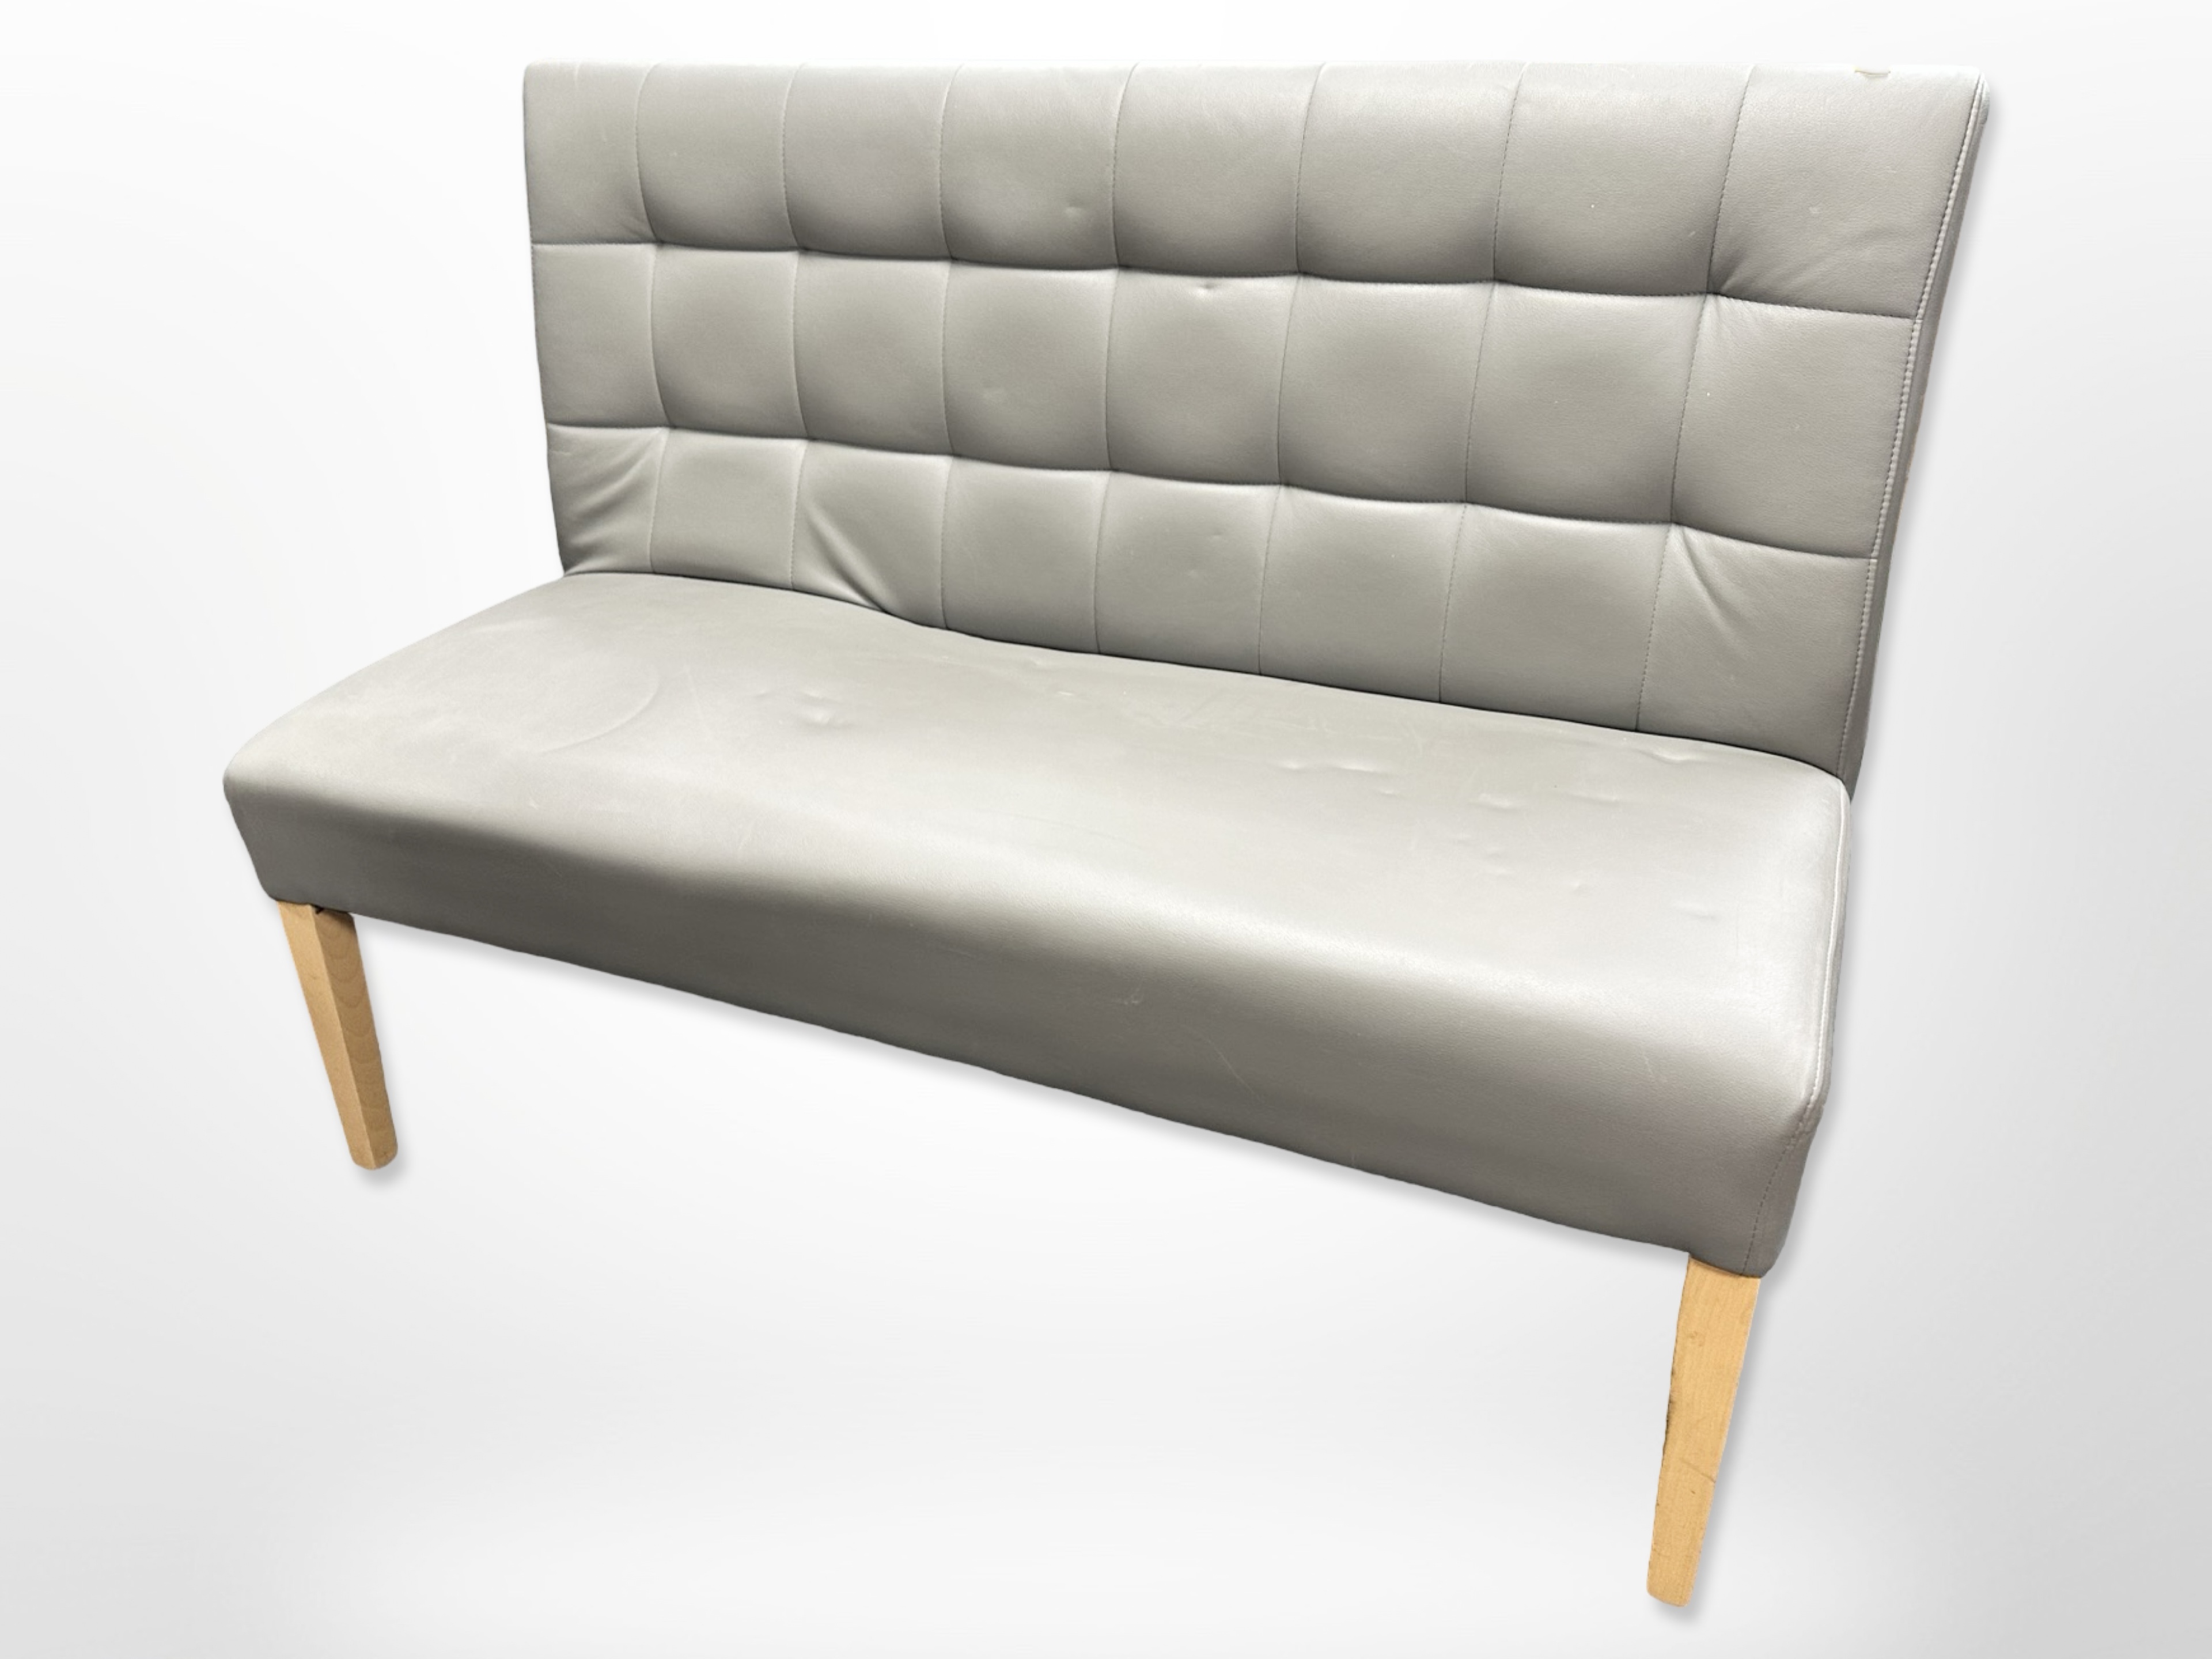 A contemporary grey stitched leather upholstered bench,